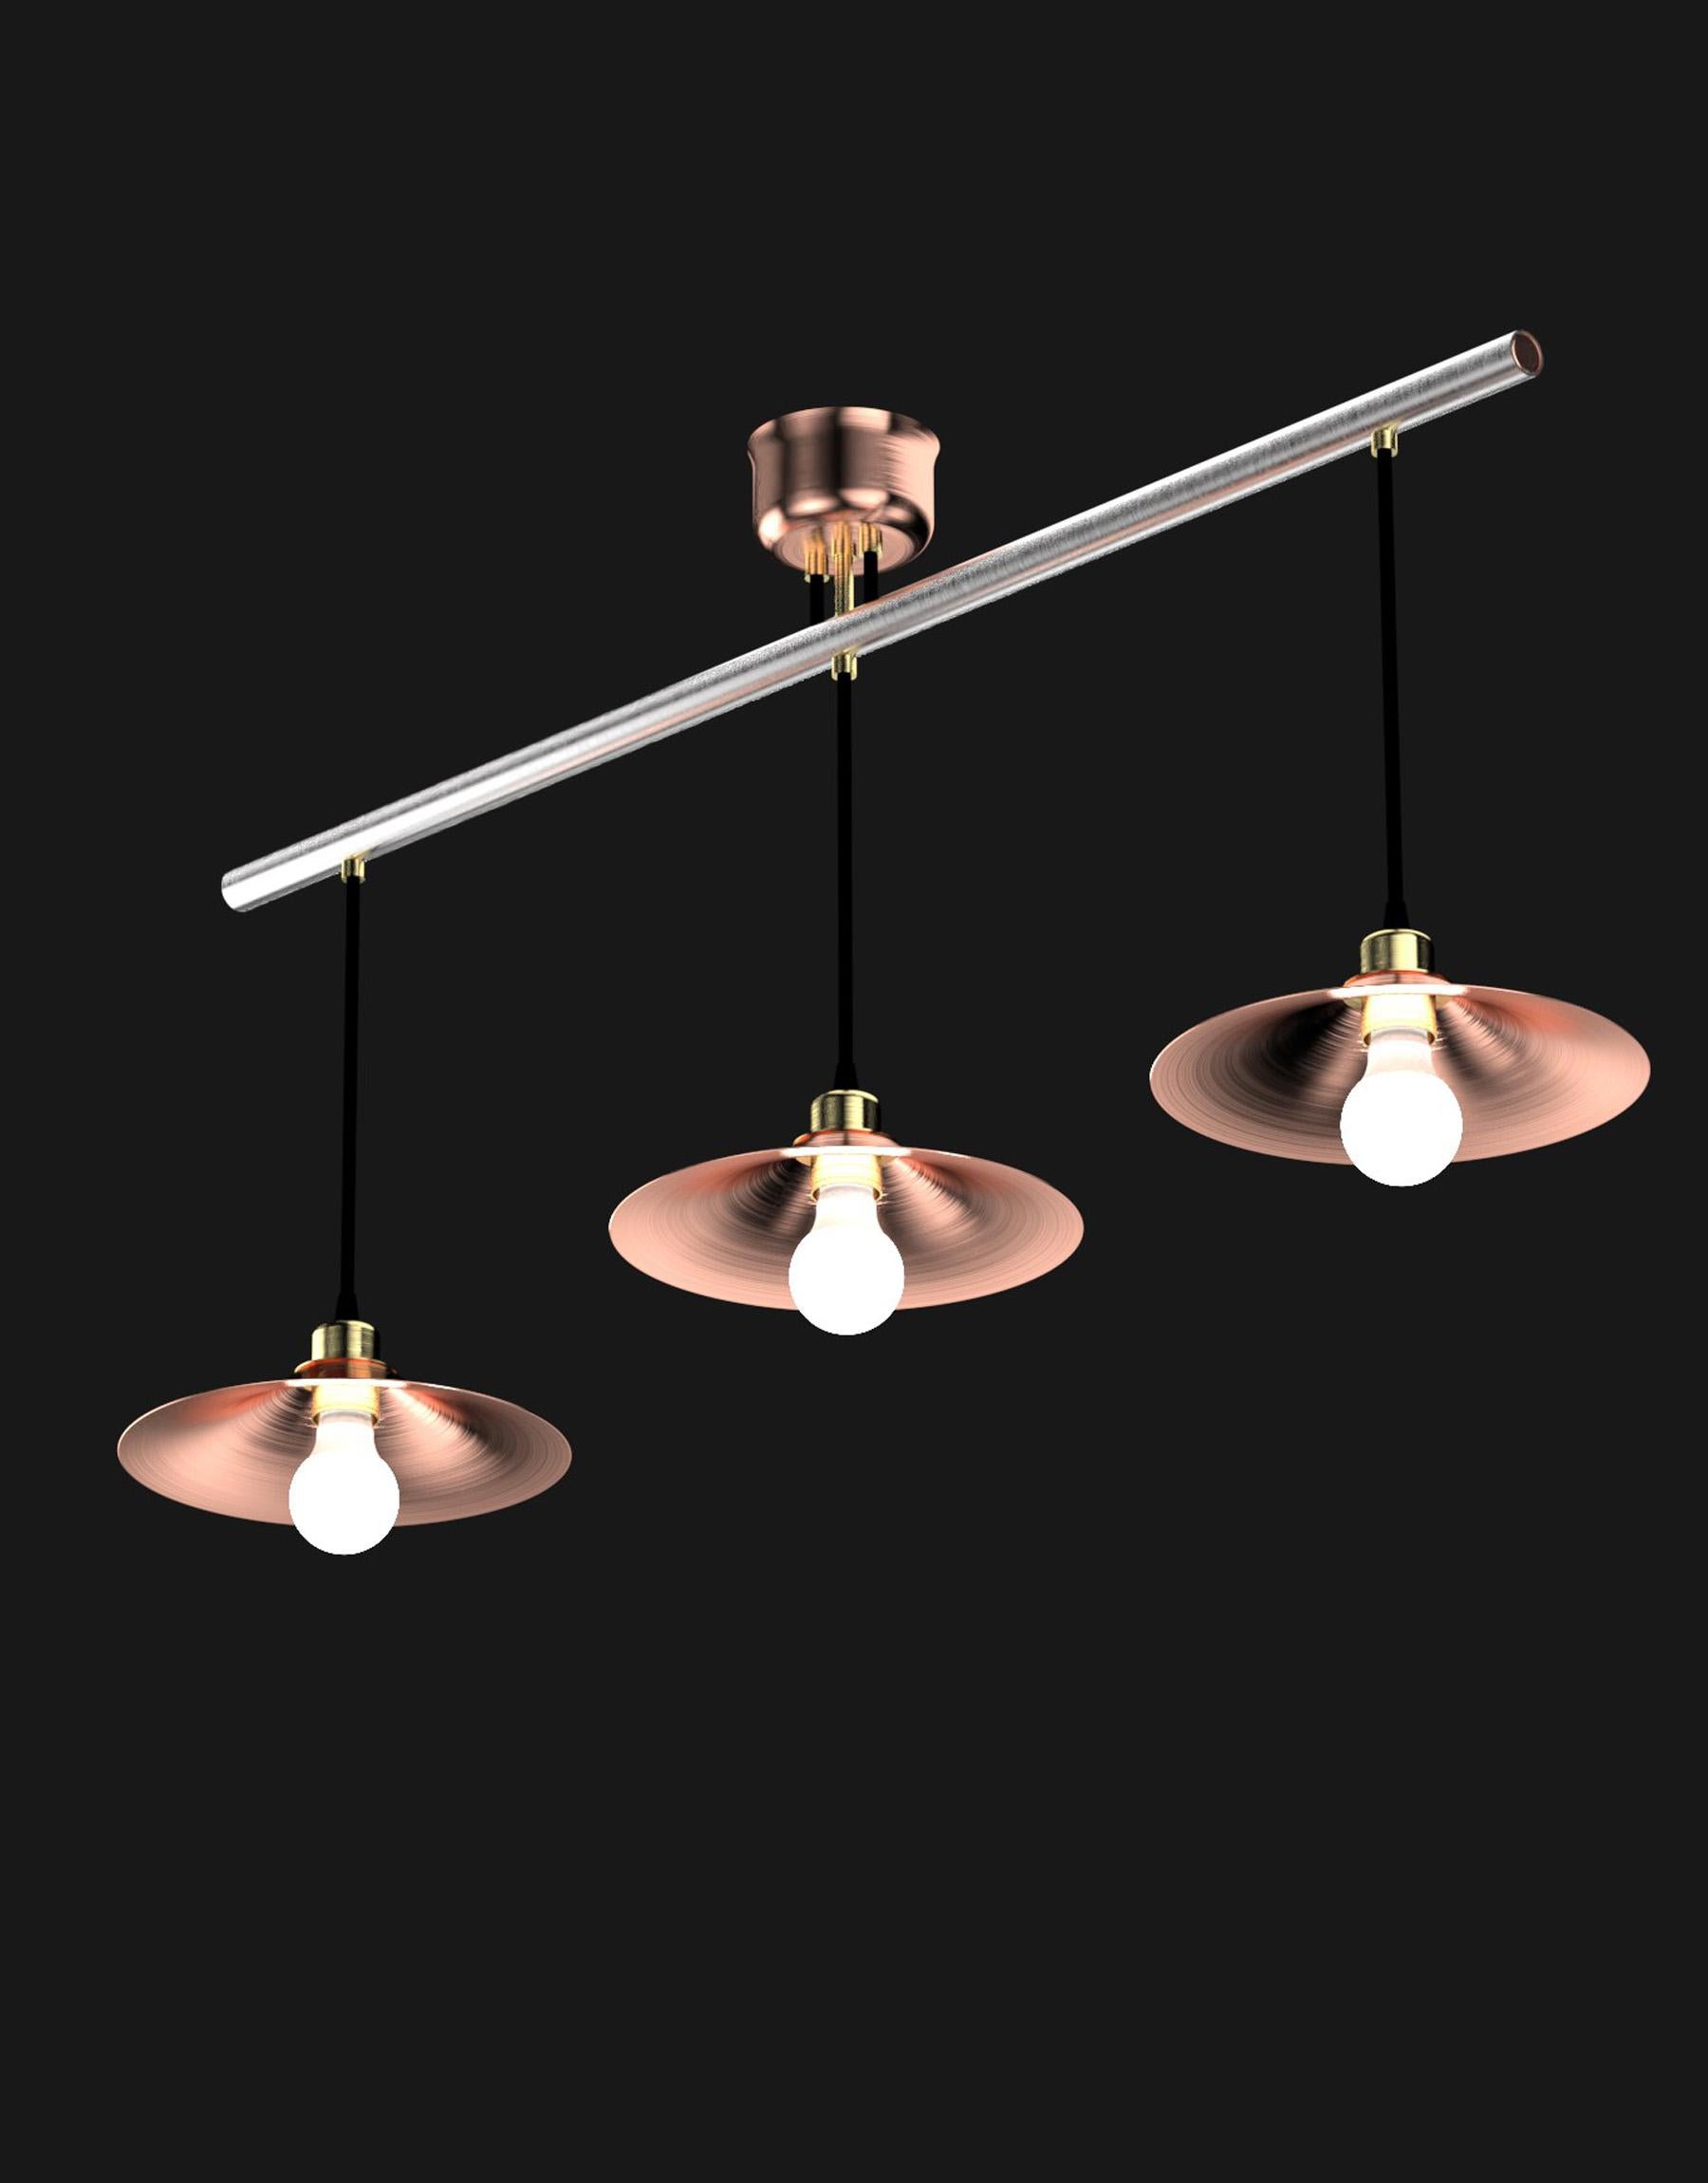 Industrial Edimate Genuine Stainless Steel/Copper Ceiling Light For Sale